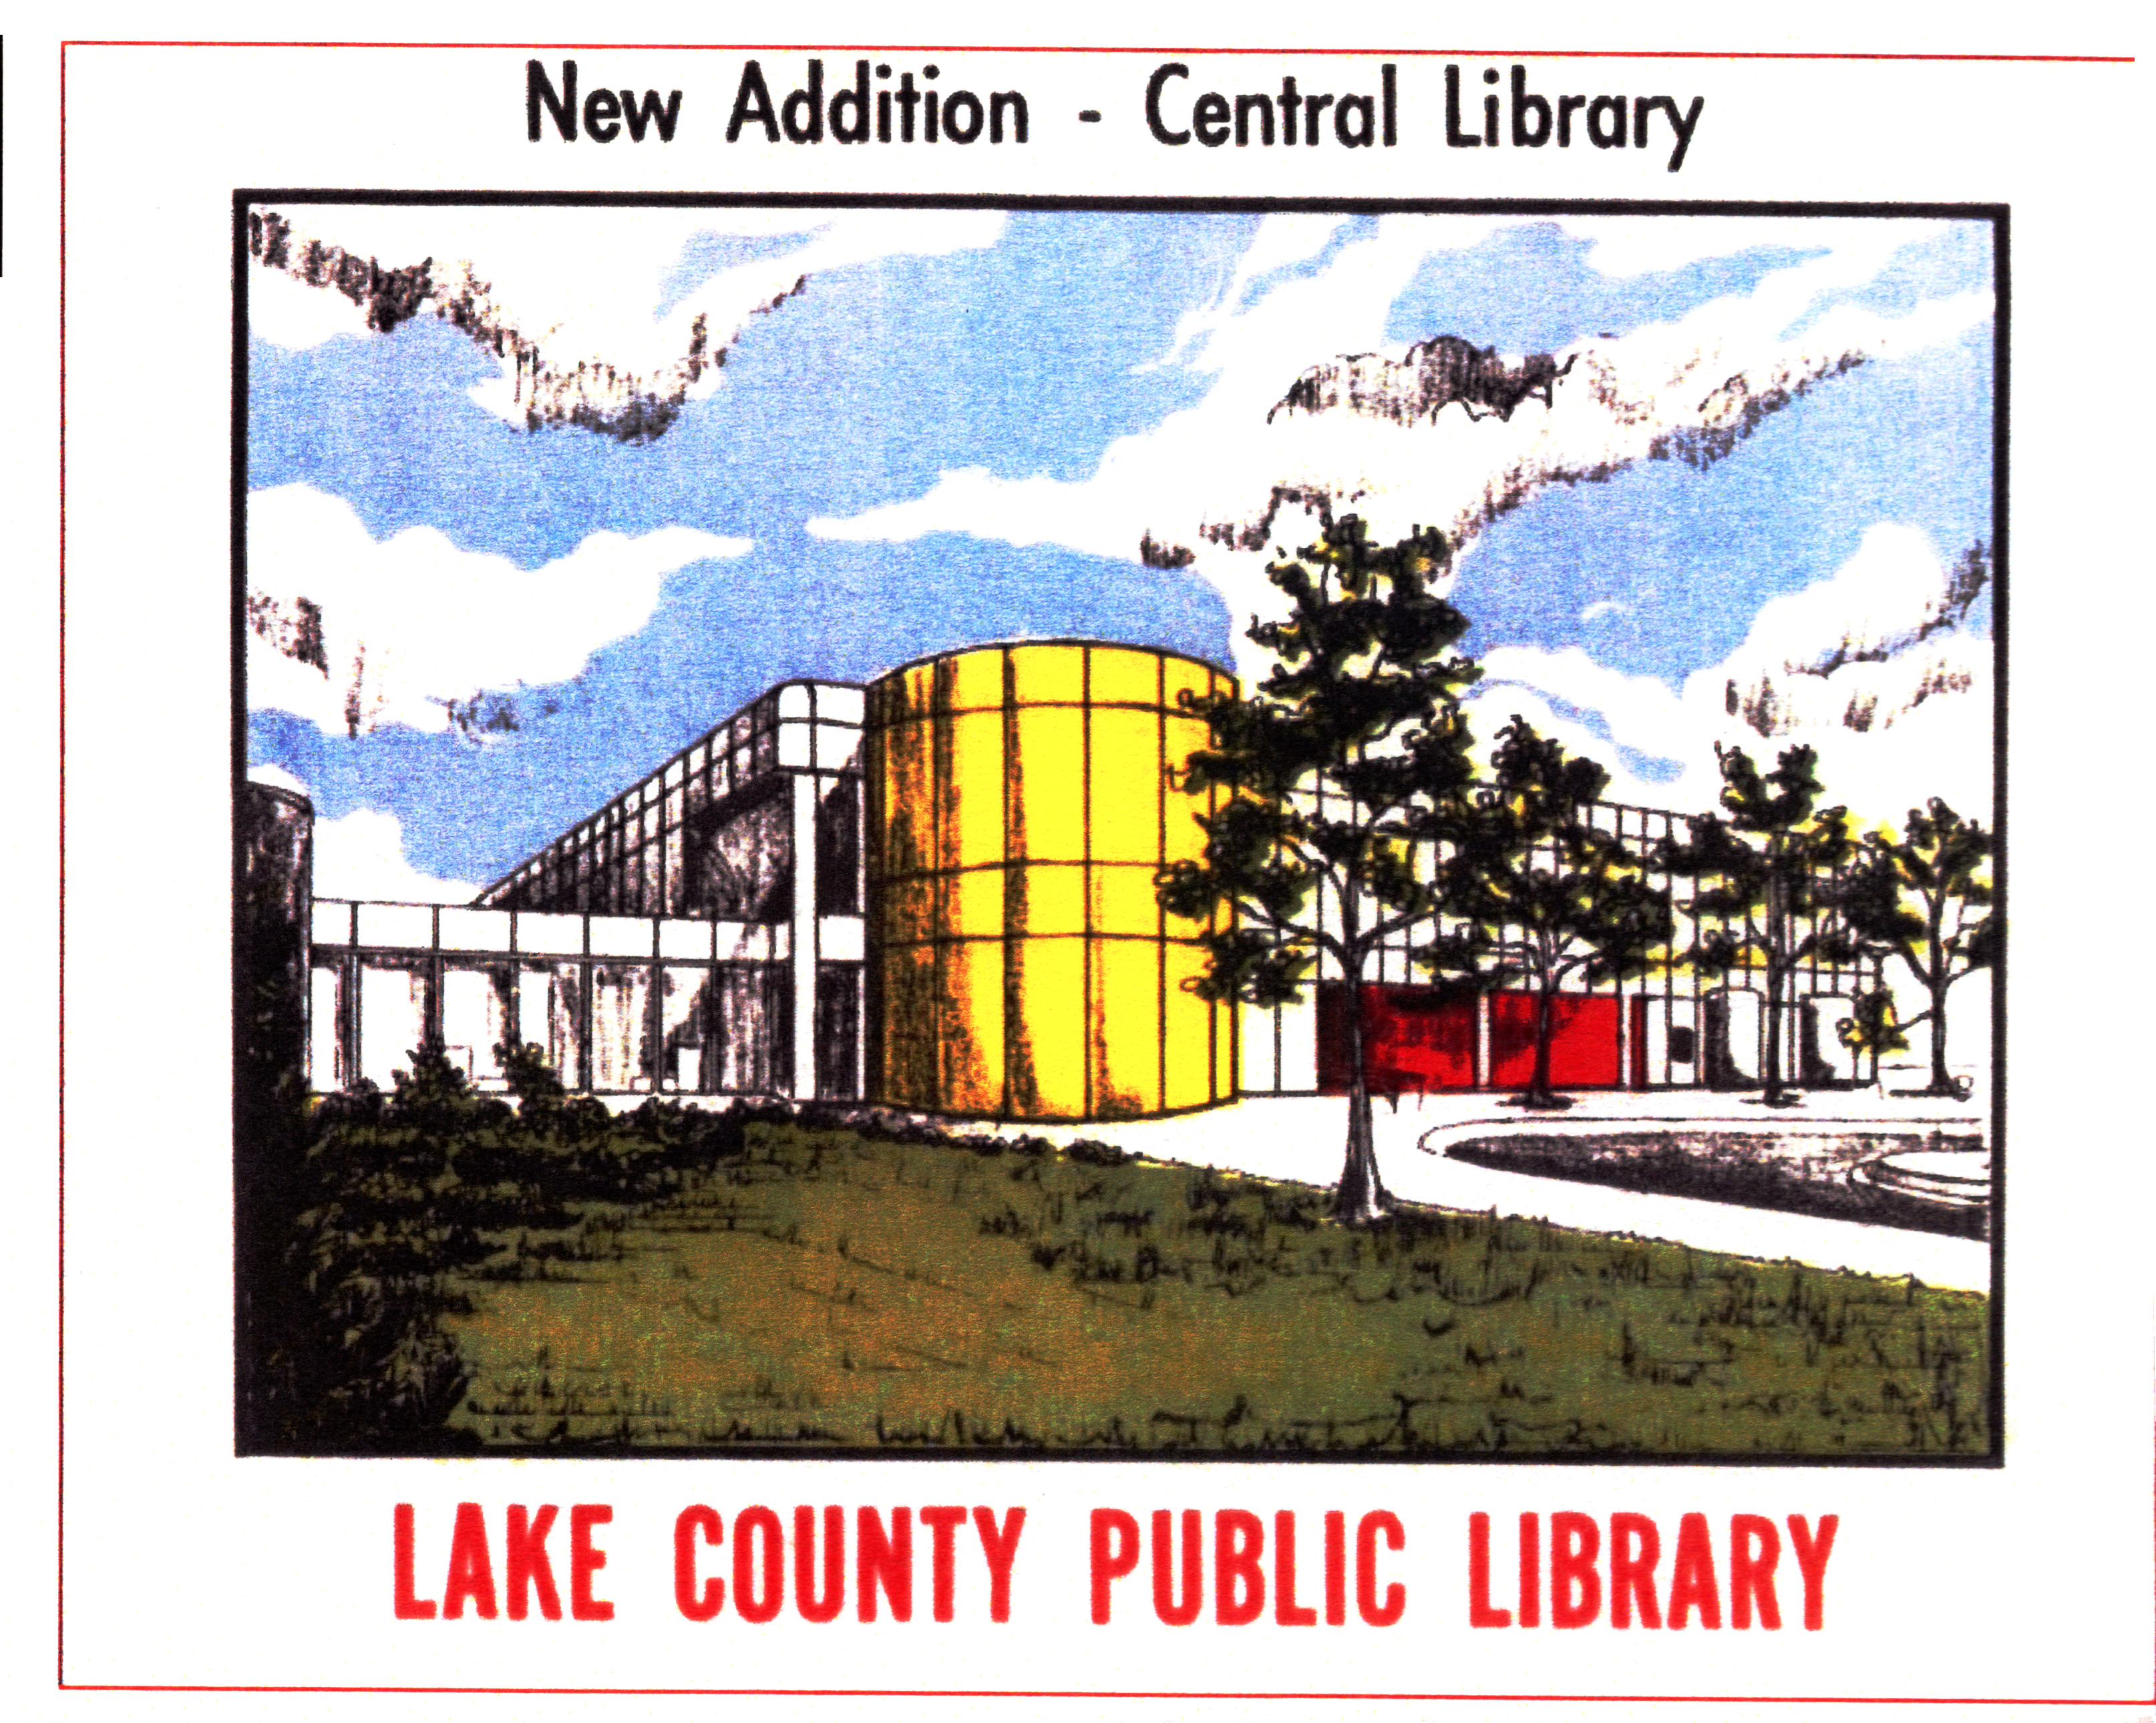 Old illustration of Merrillville Branch when it had the white paneling and yellow tower